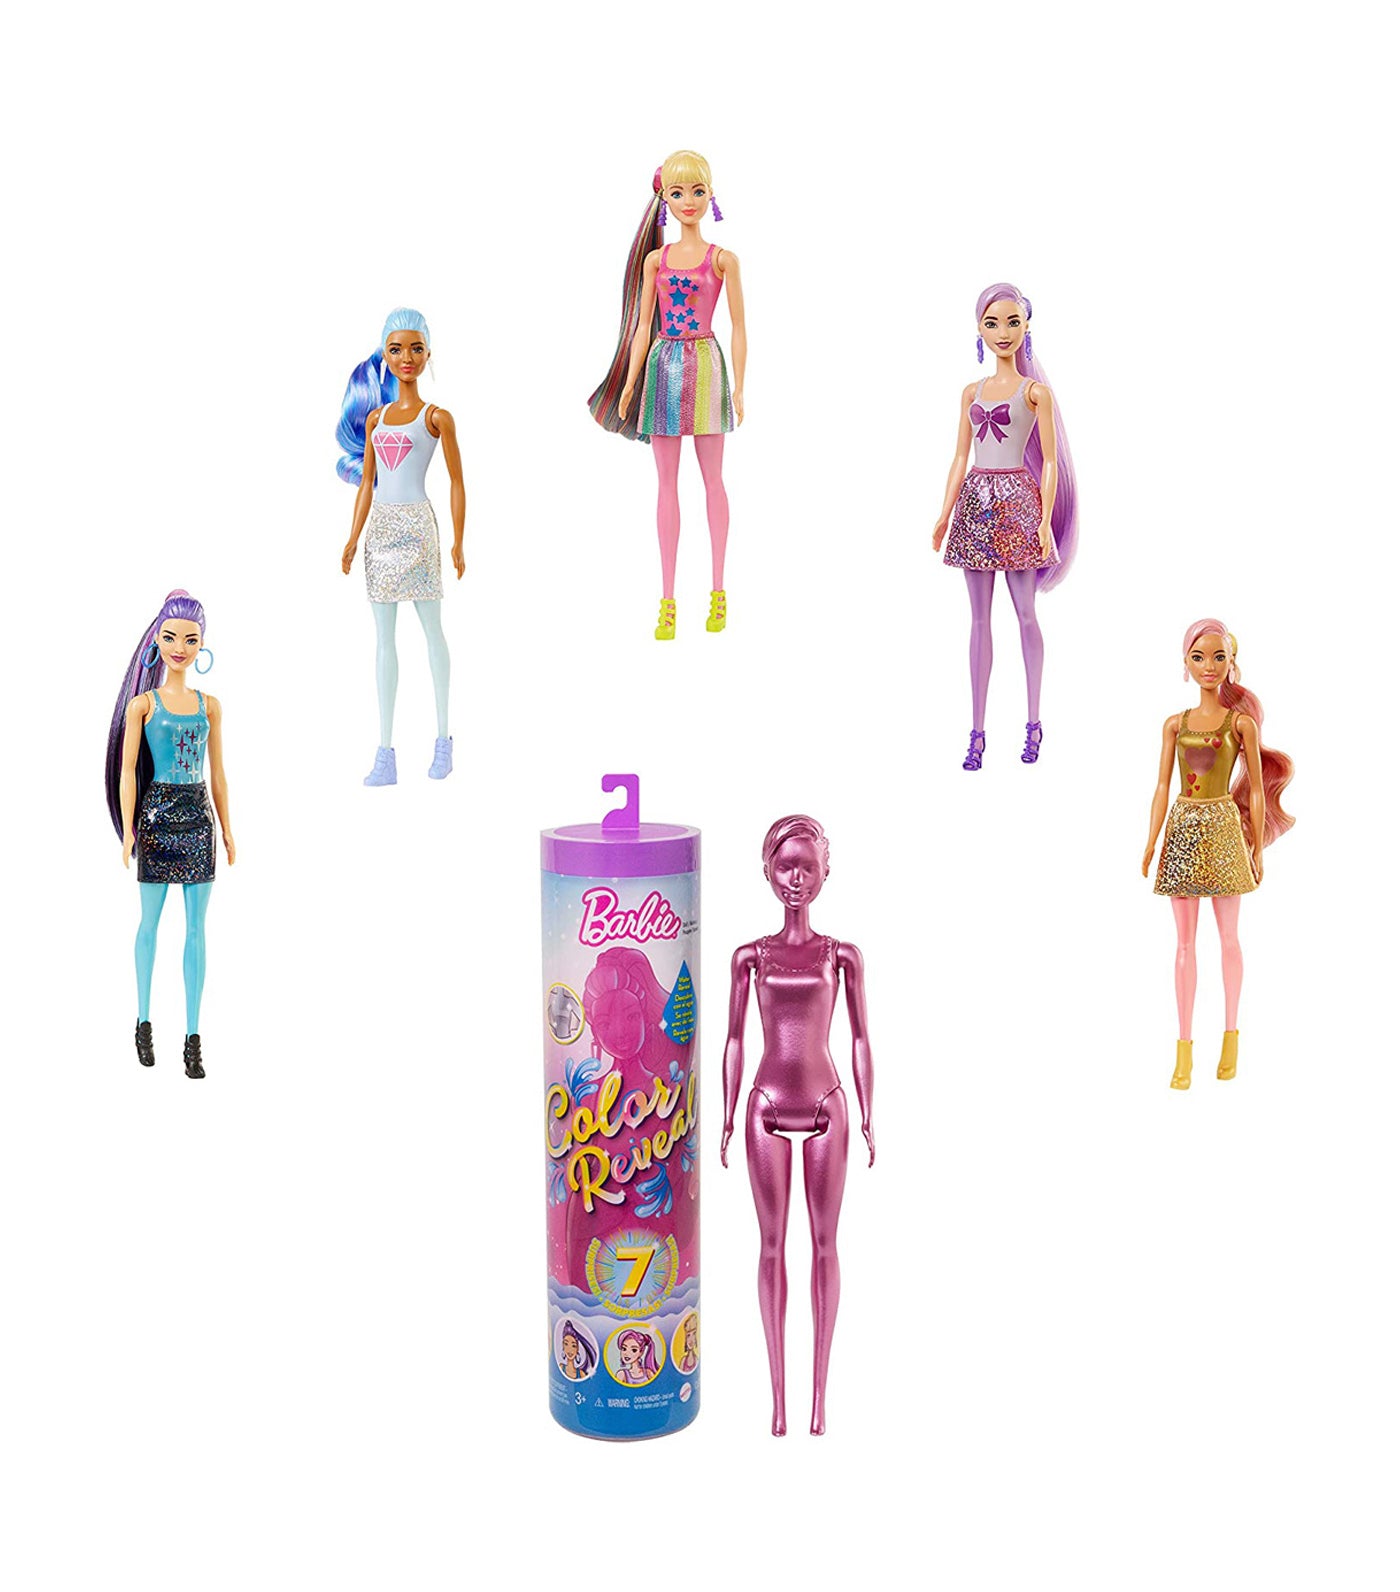 BARBIE COLOR REVEAL - The Toy Insider